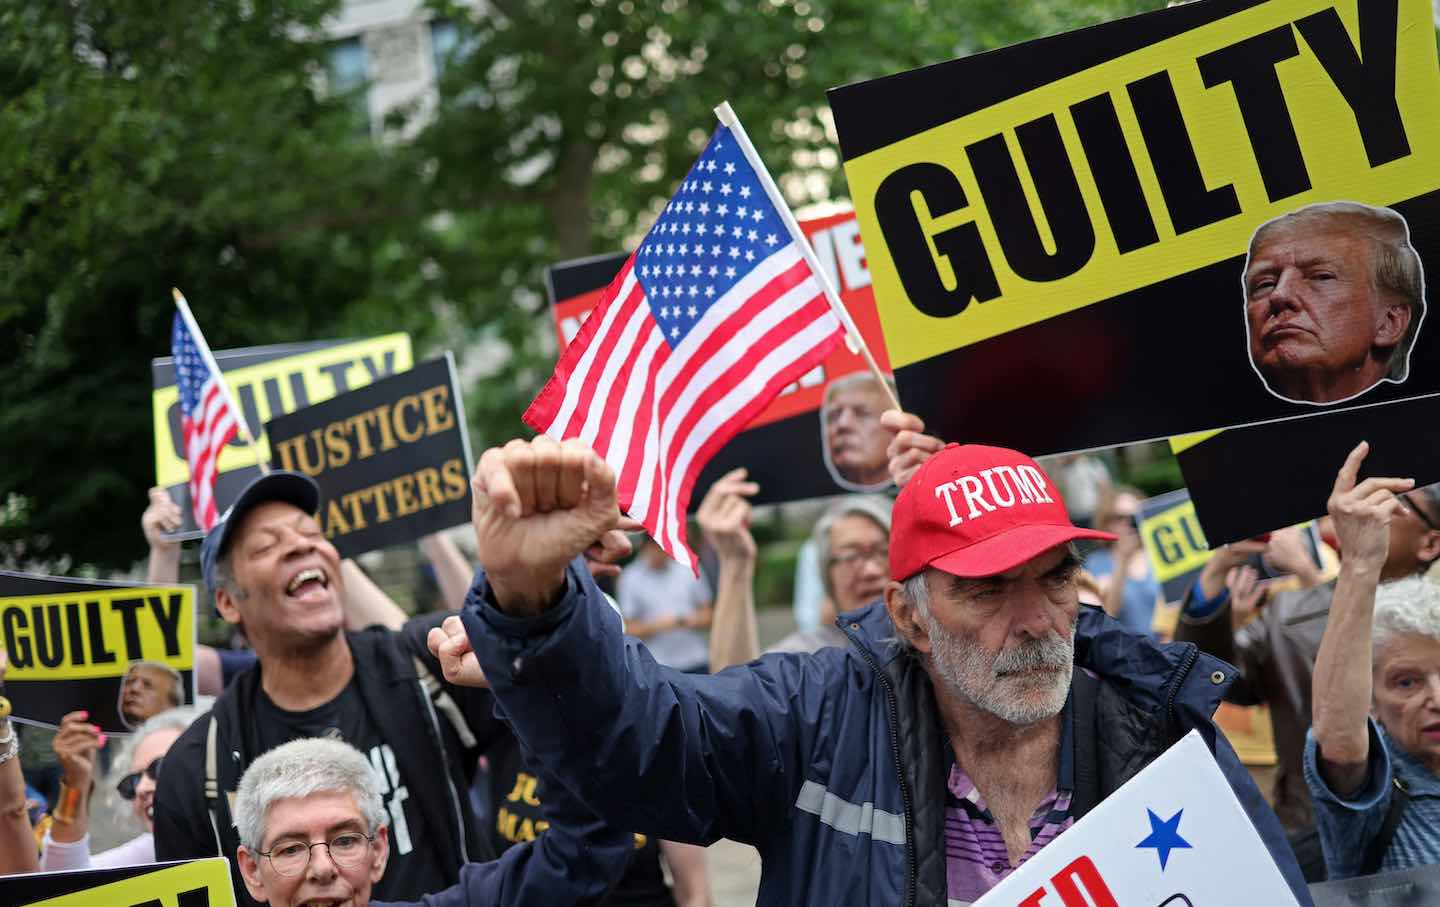 People react after former US president and Republican presidential candidate Donald J. Trump was convicted in his criminal trial outside of Manhattan Criminal Court in New York City on May 30.